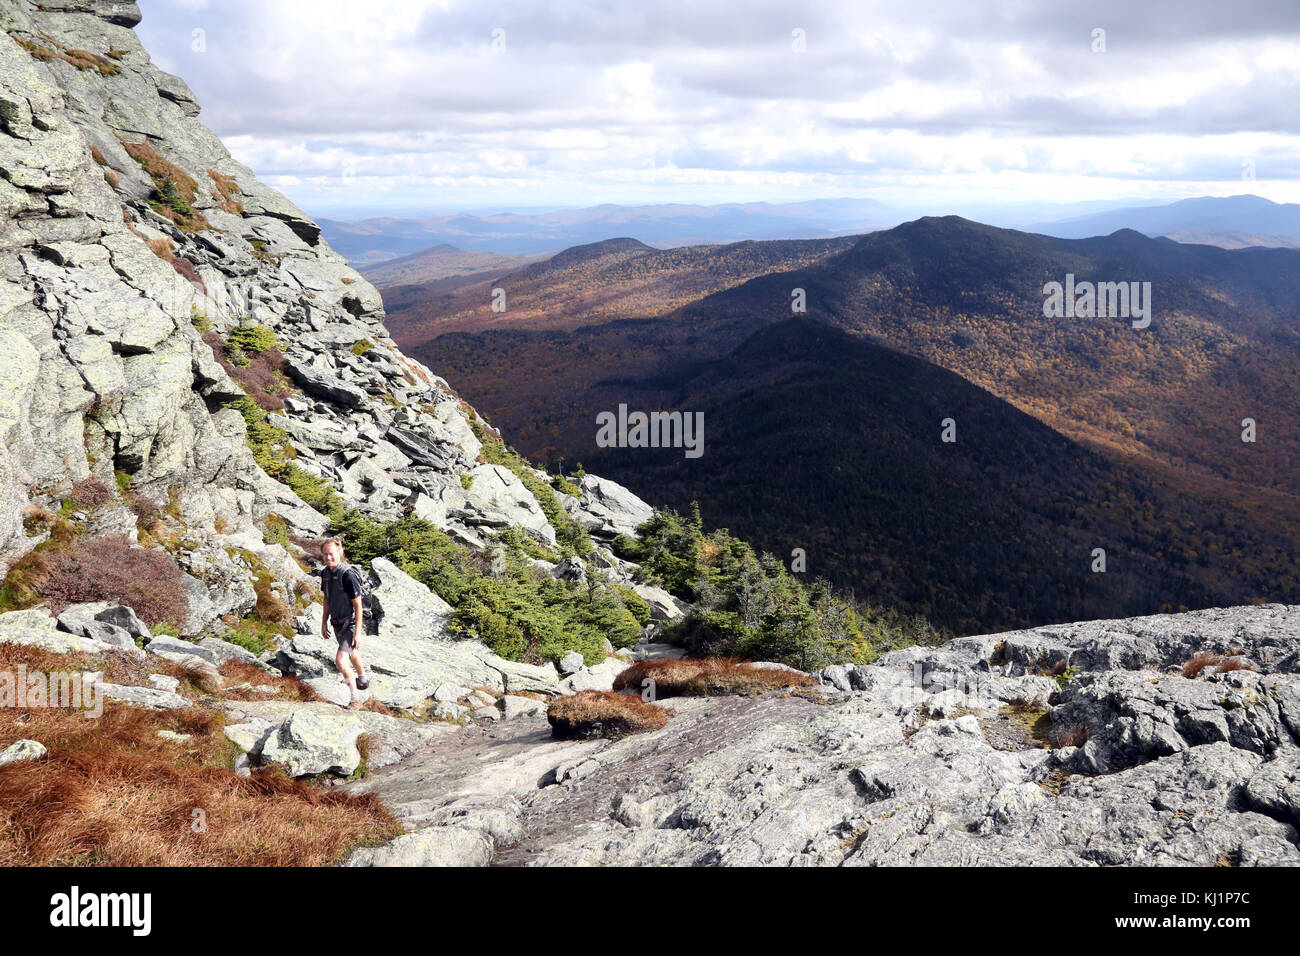 Man hiking the Long Trail near the summit of Camel's Hump, VT, USA Stock Photo